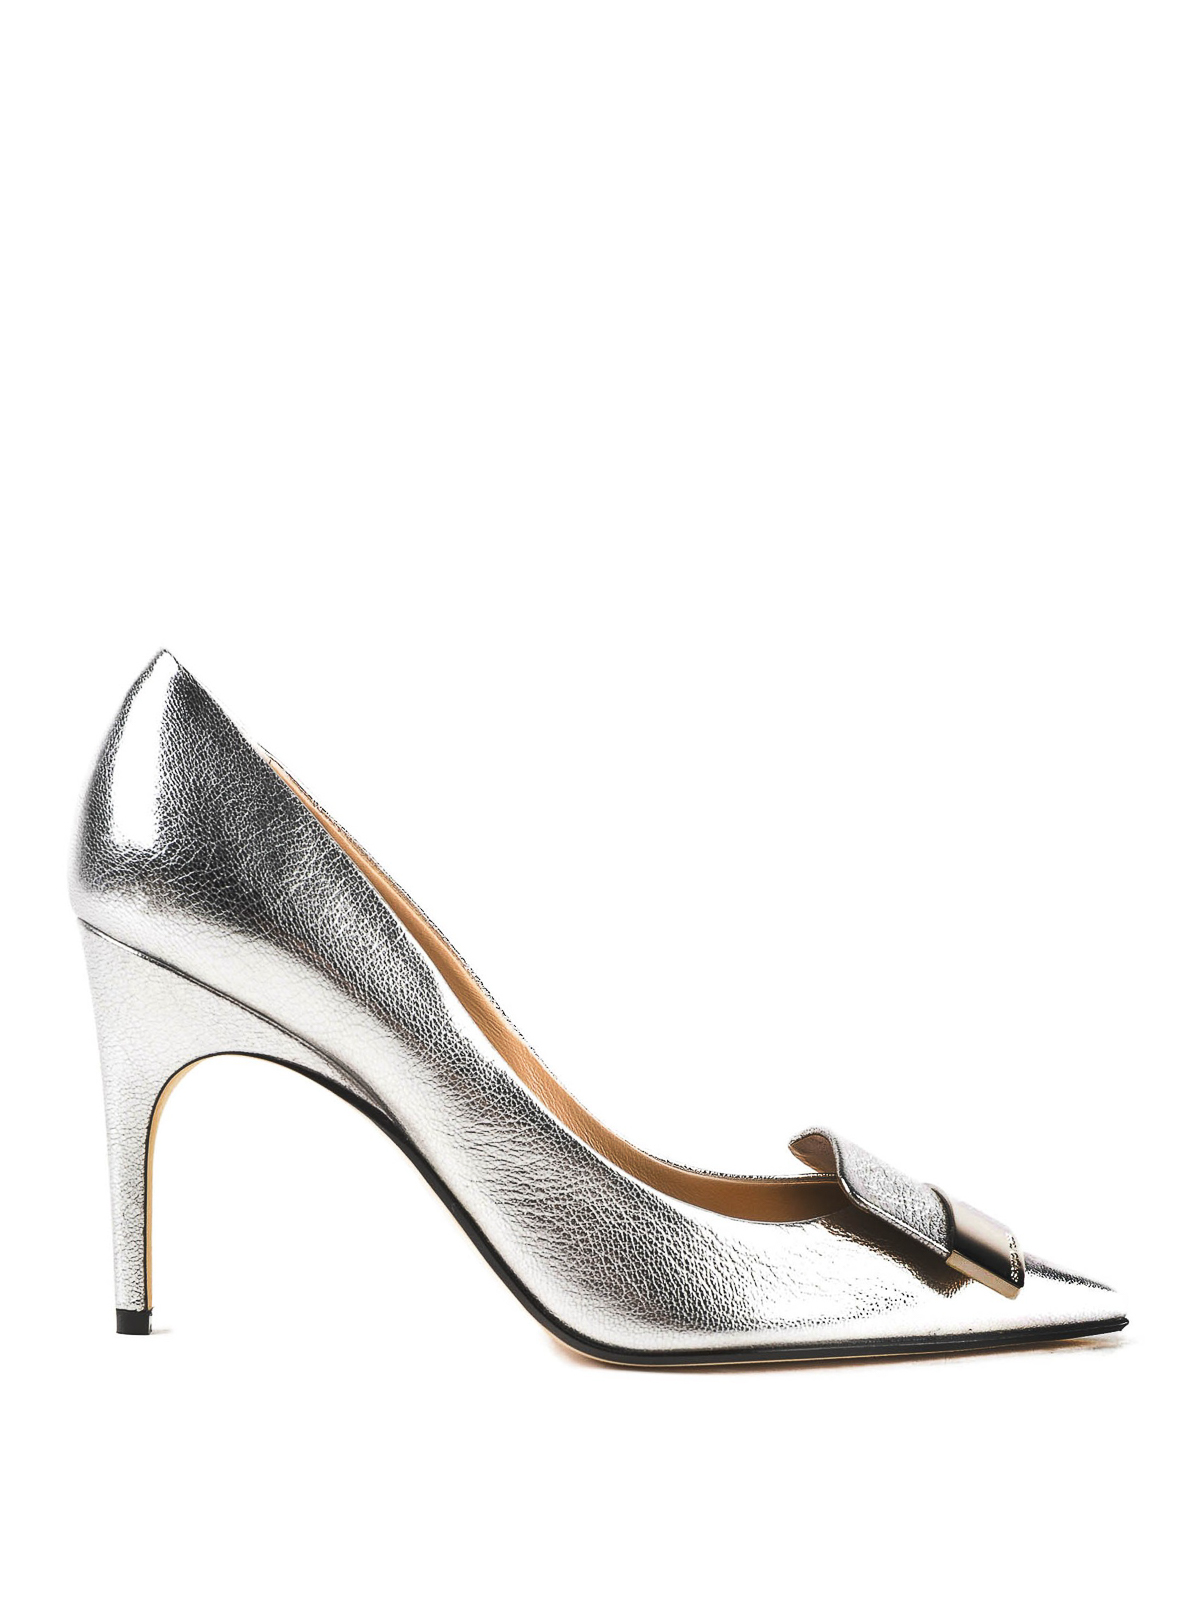 Court shoes Sergio Rossi - Sr1 silver leather pumps - A78953MCAL078102